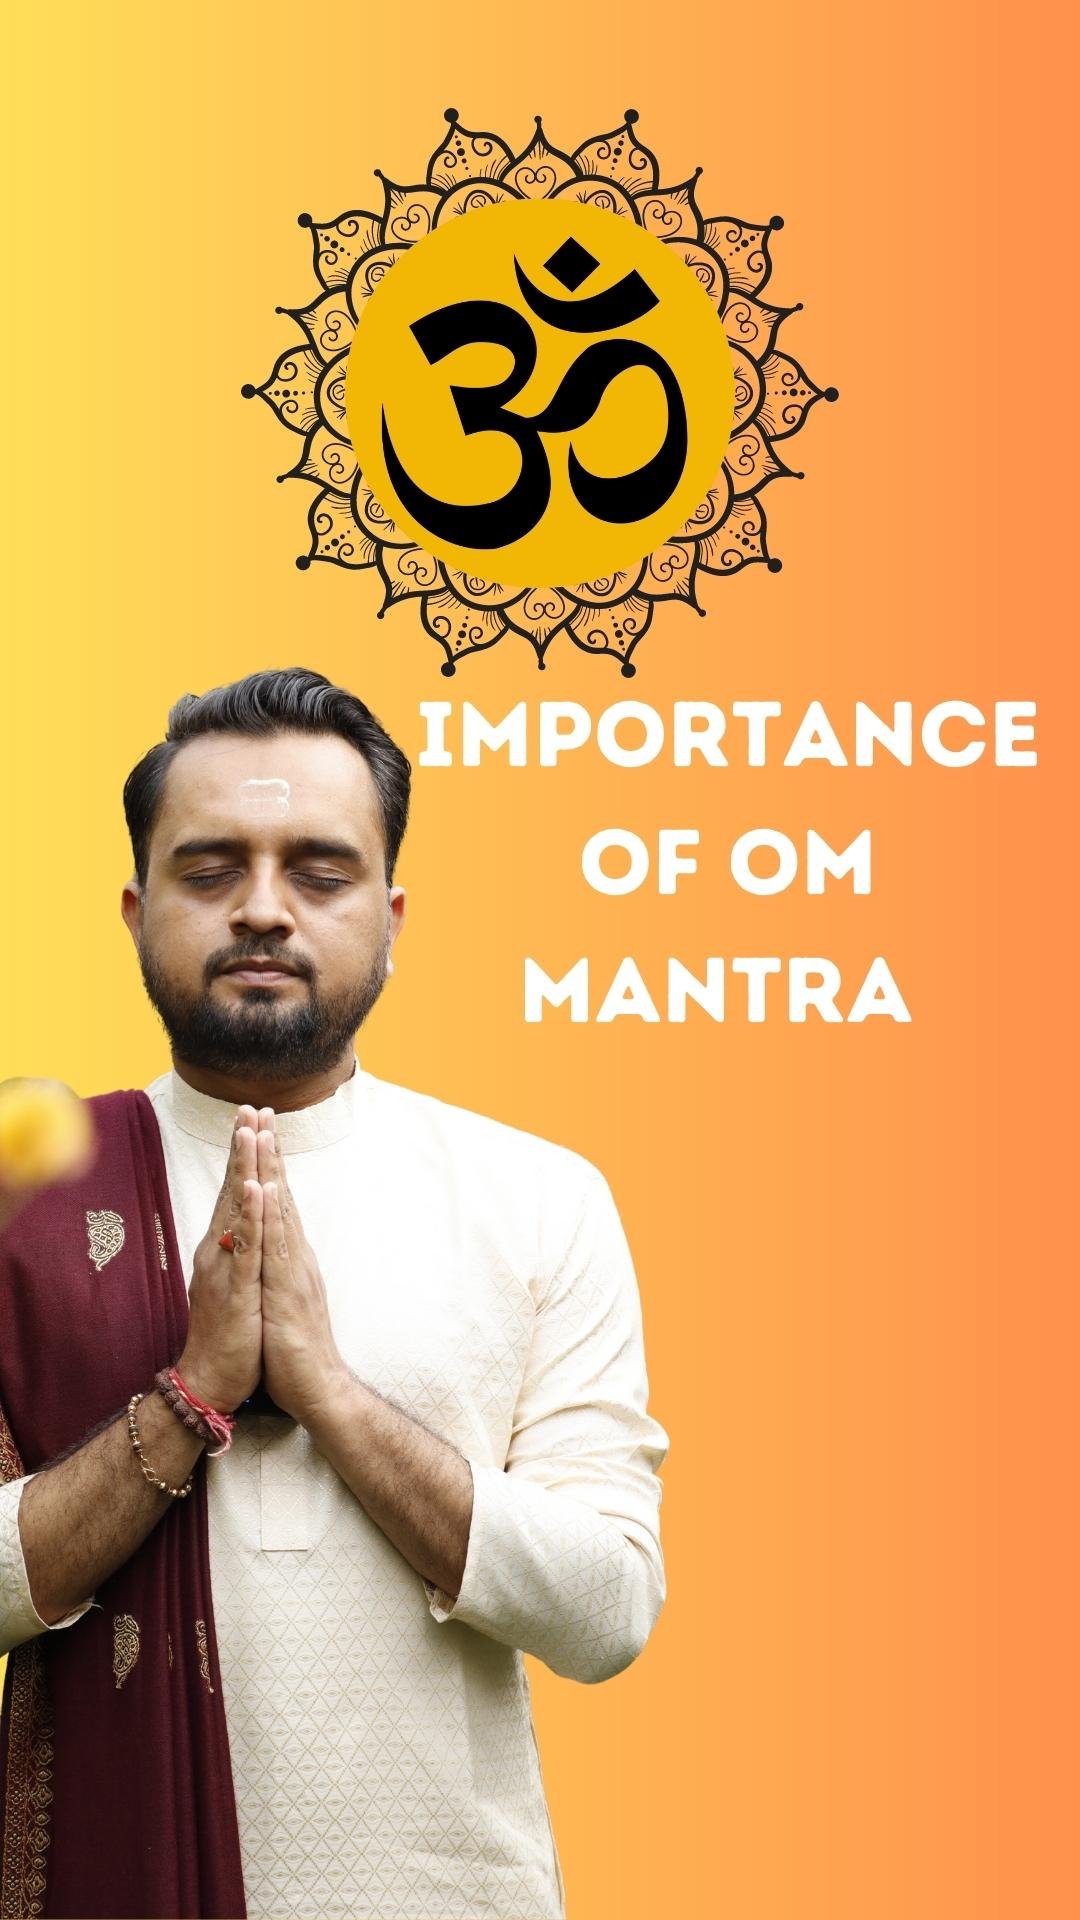 The importance of chanting OM